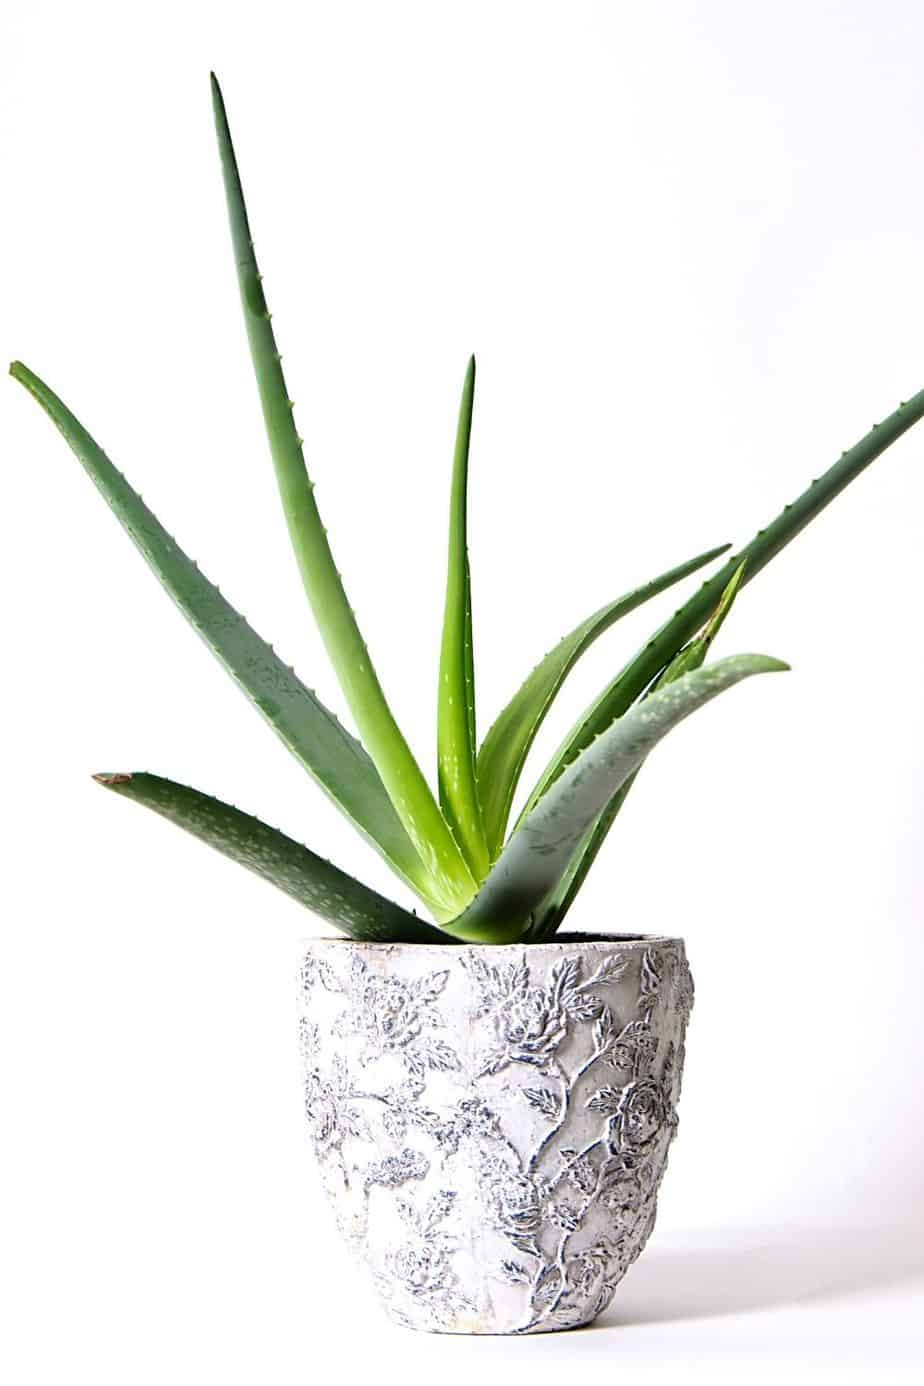 With its many beneficial properties, you can grow your Aloe Vera near your southwest-facing window